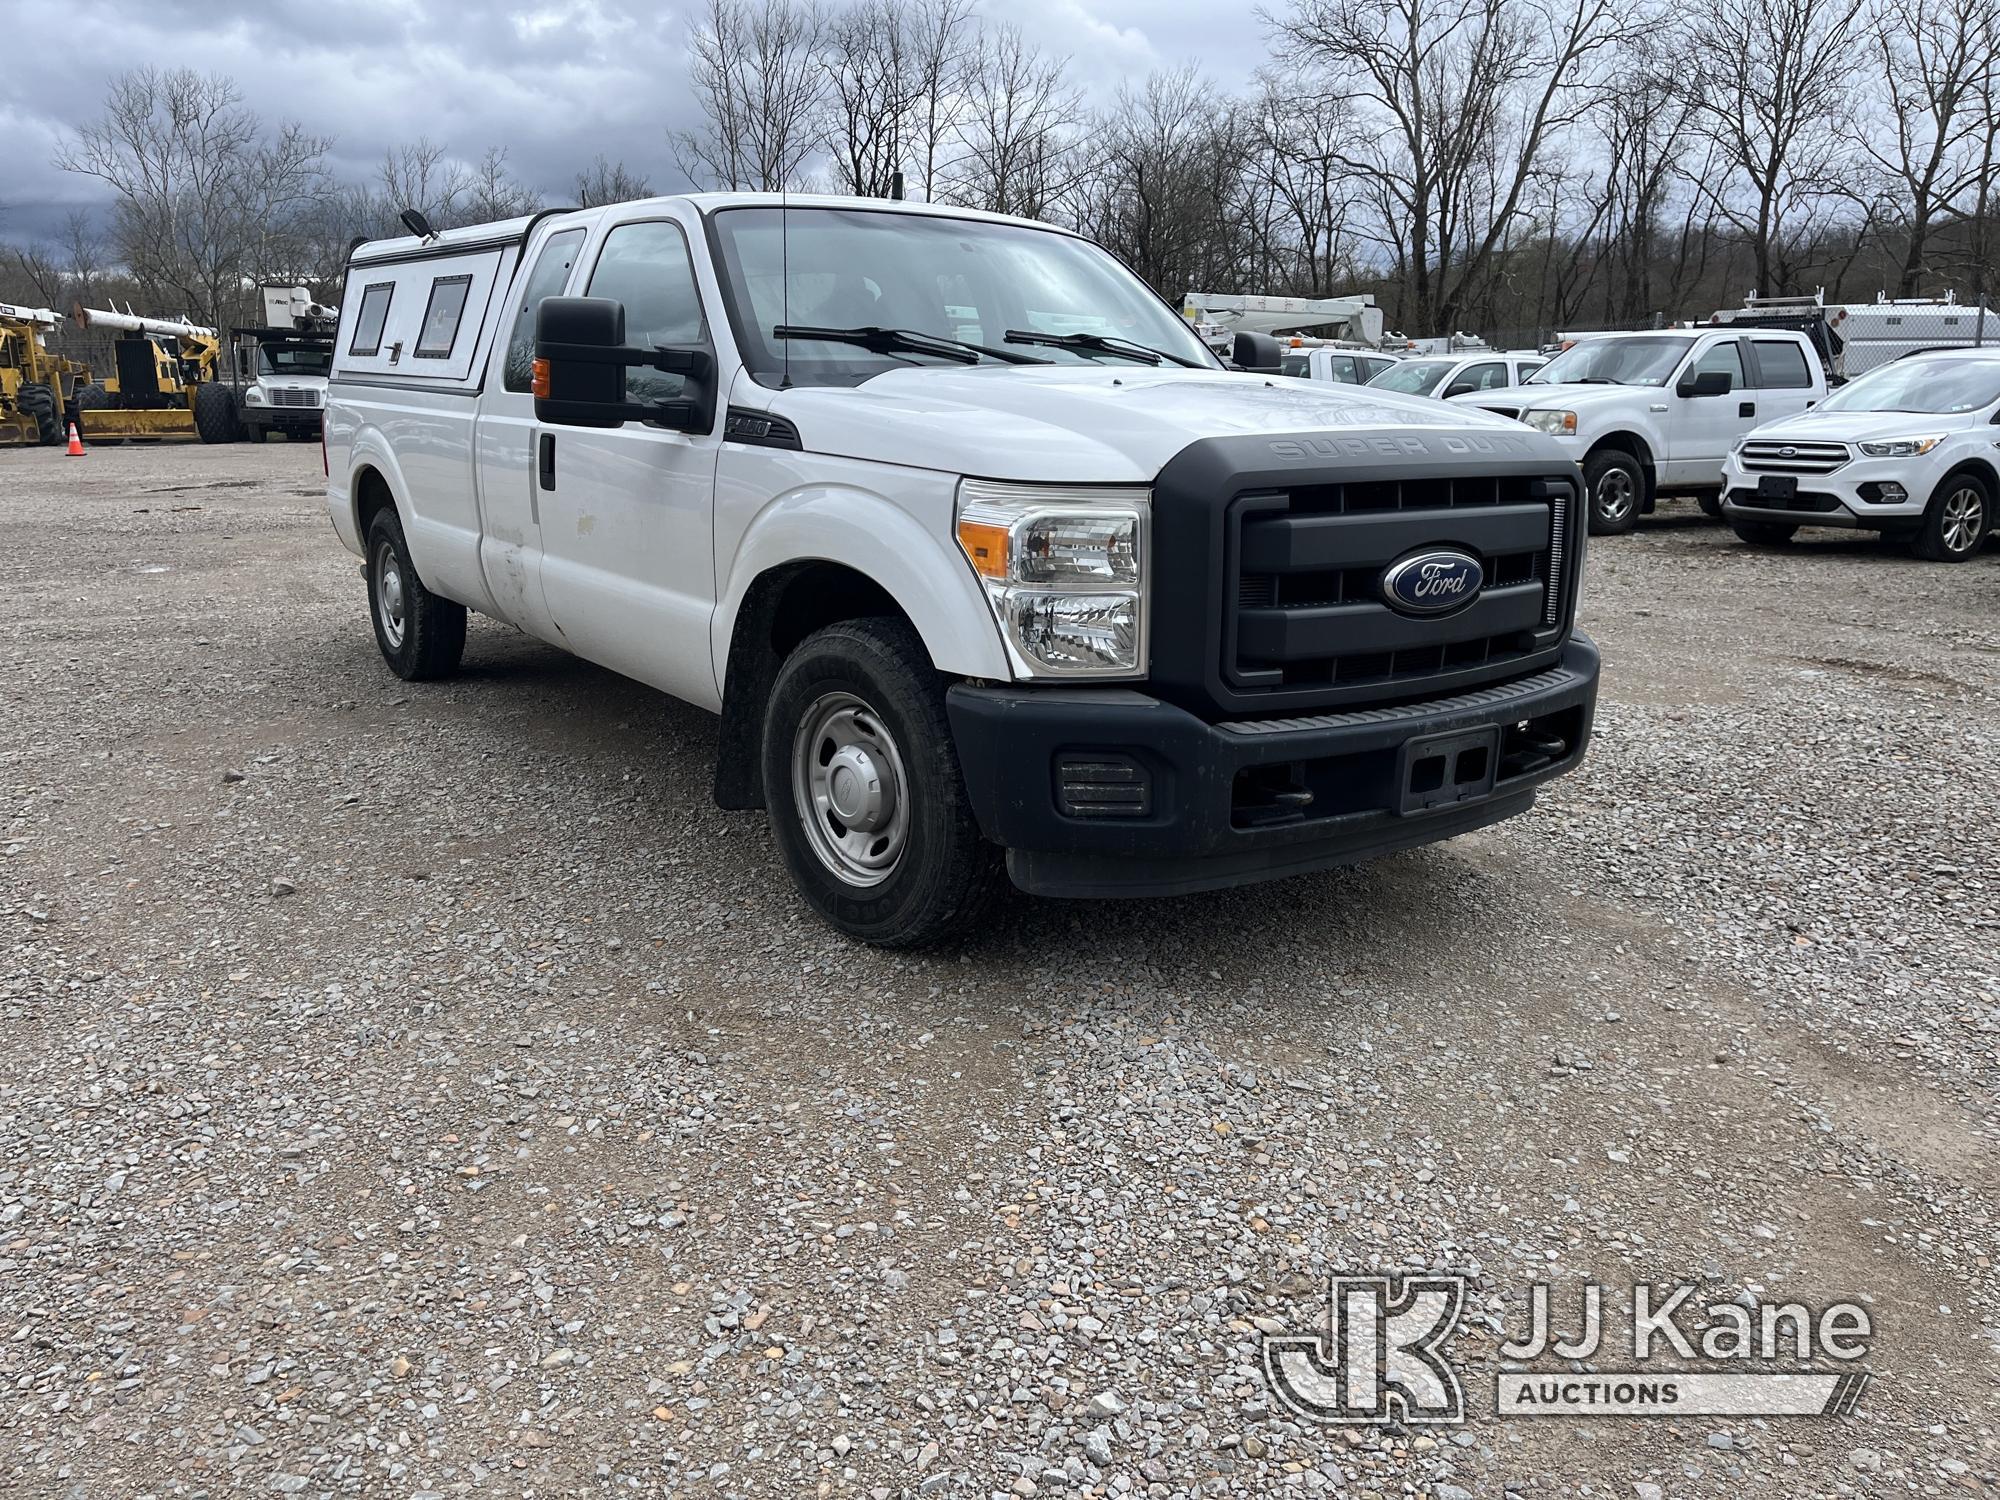 (Smock, PA) 2013 Ford F250 Extended-Cab Pickup Truck Title Delay) (Runs & Moves, Engine Noise, Air C